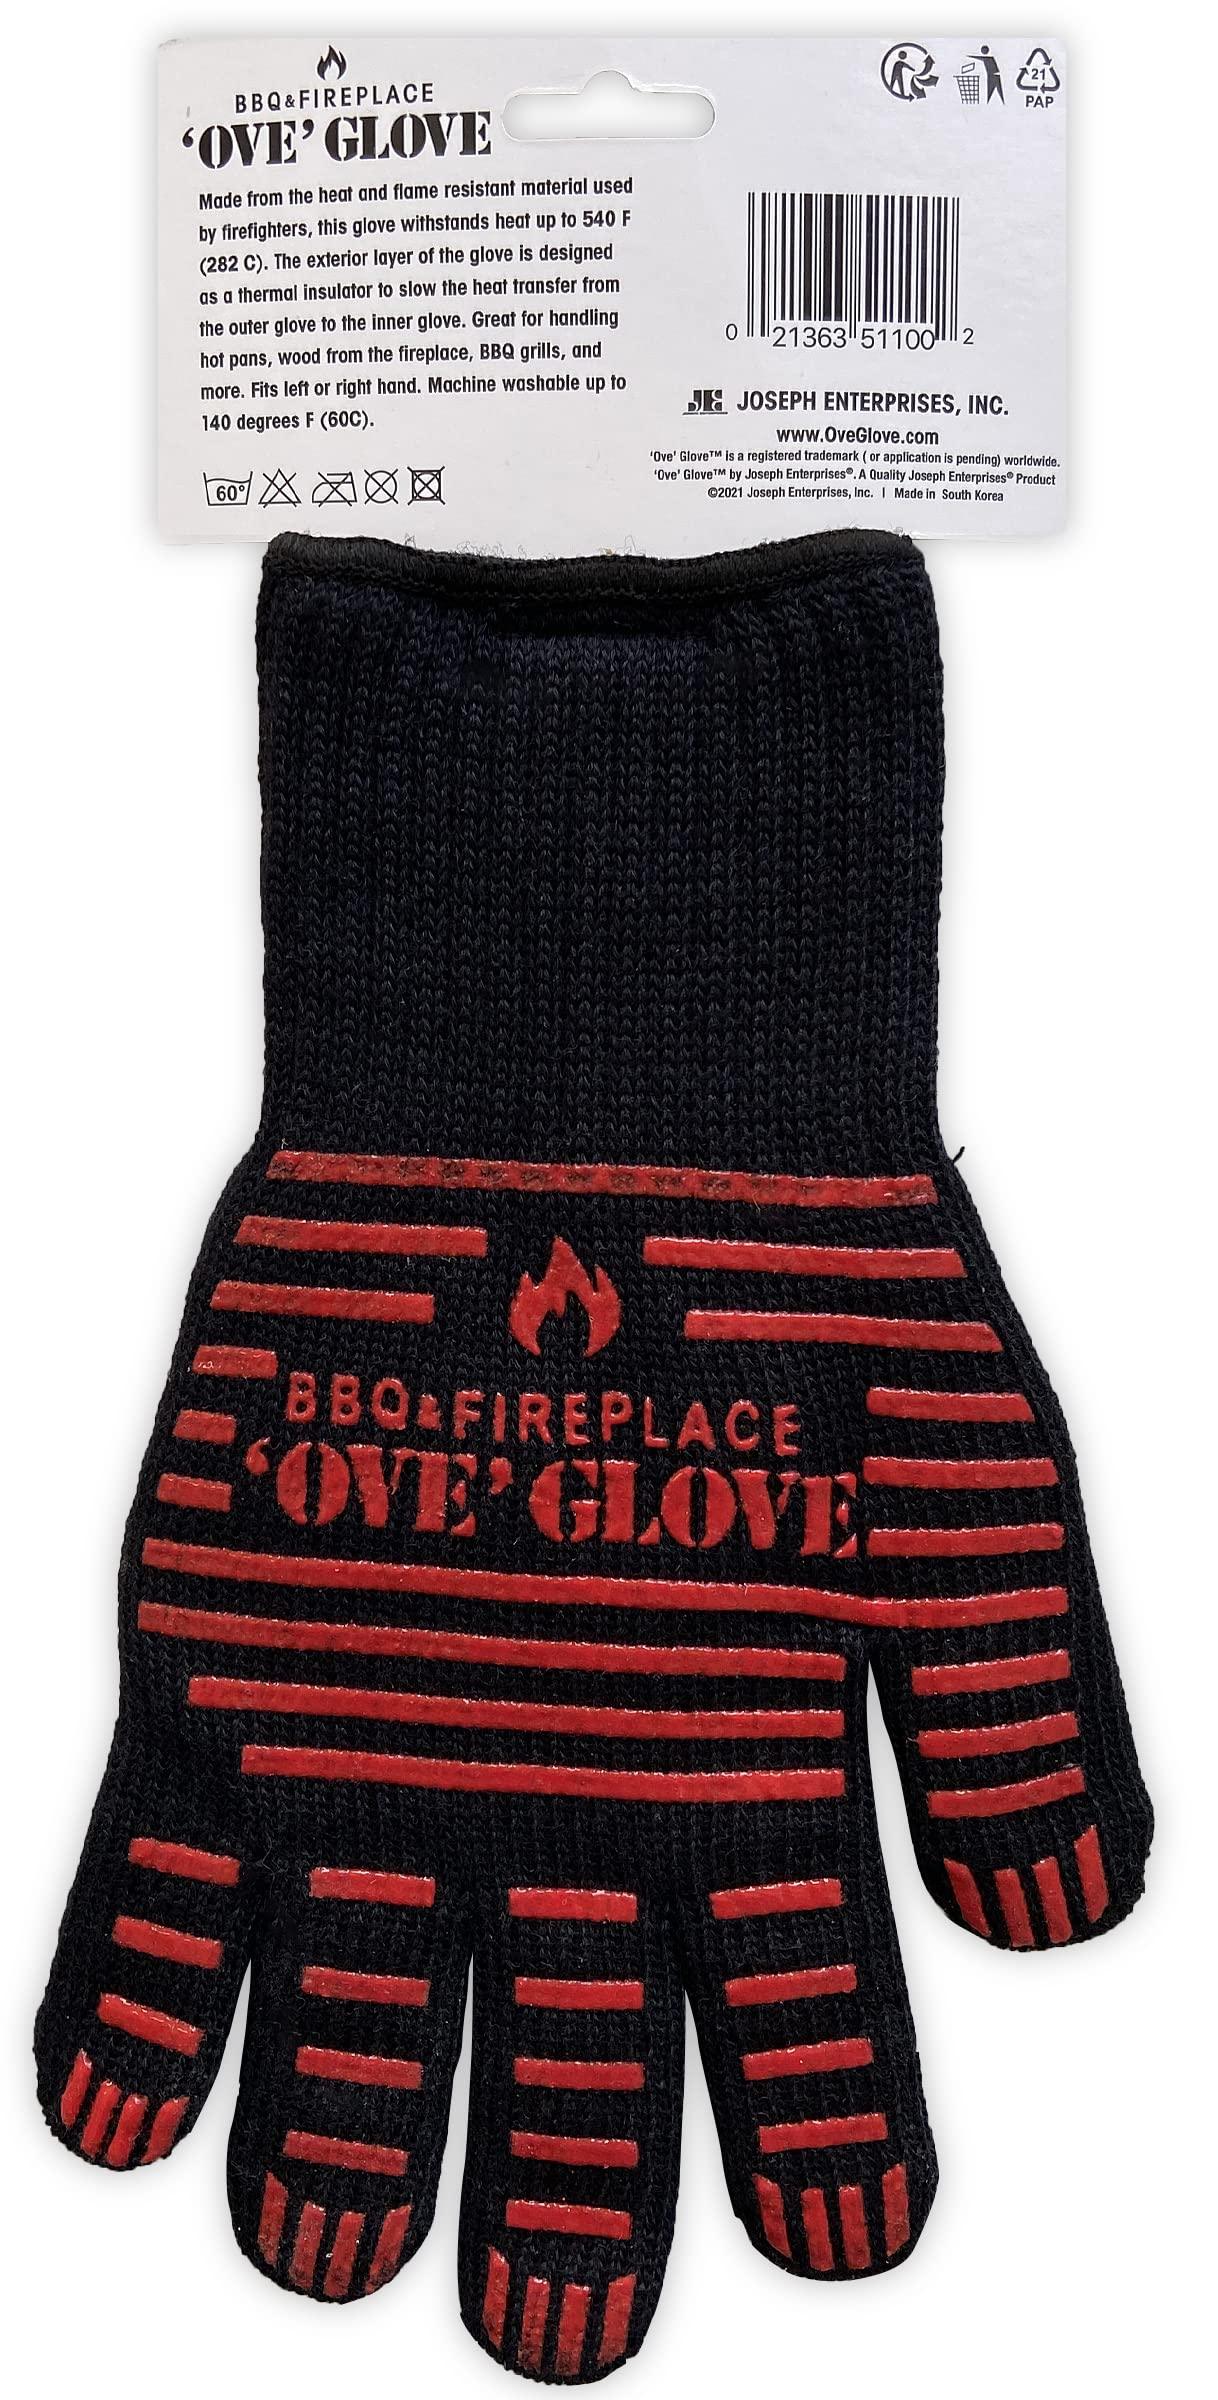 BBQ Ove Glove - Superior Heat and Flame Protection - Extended Wrist for Additional Safety - Ideal for Outdoor Cooking, Grilling, Barbeque - CookCave